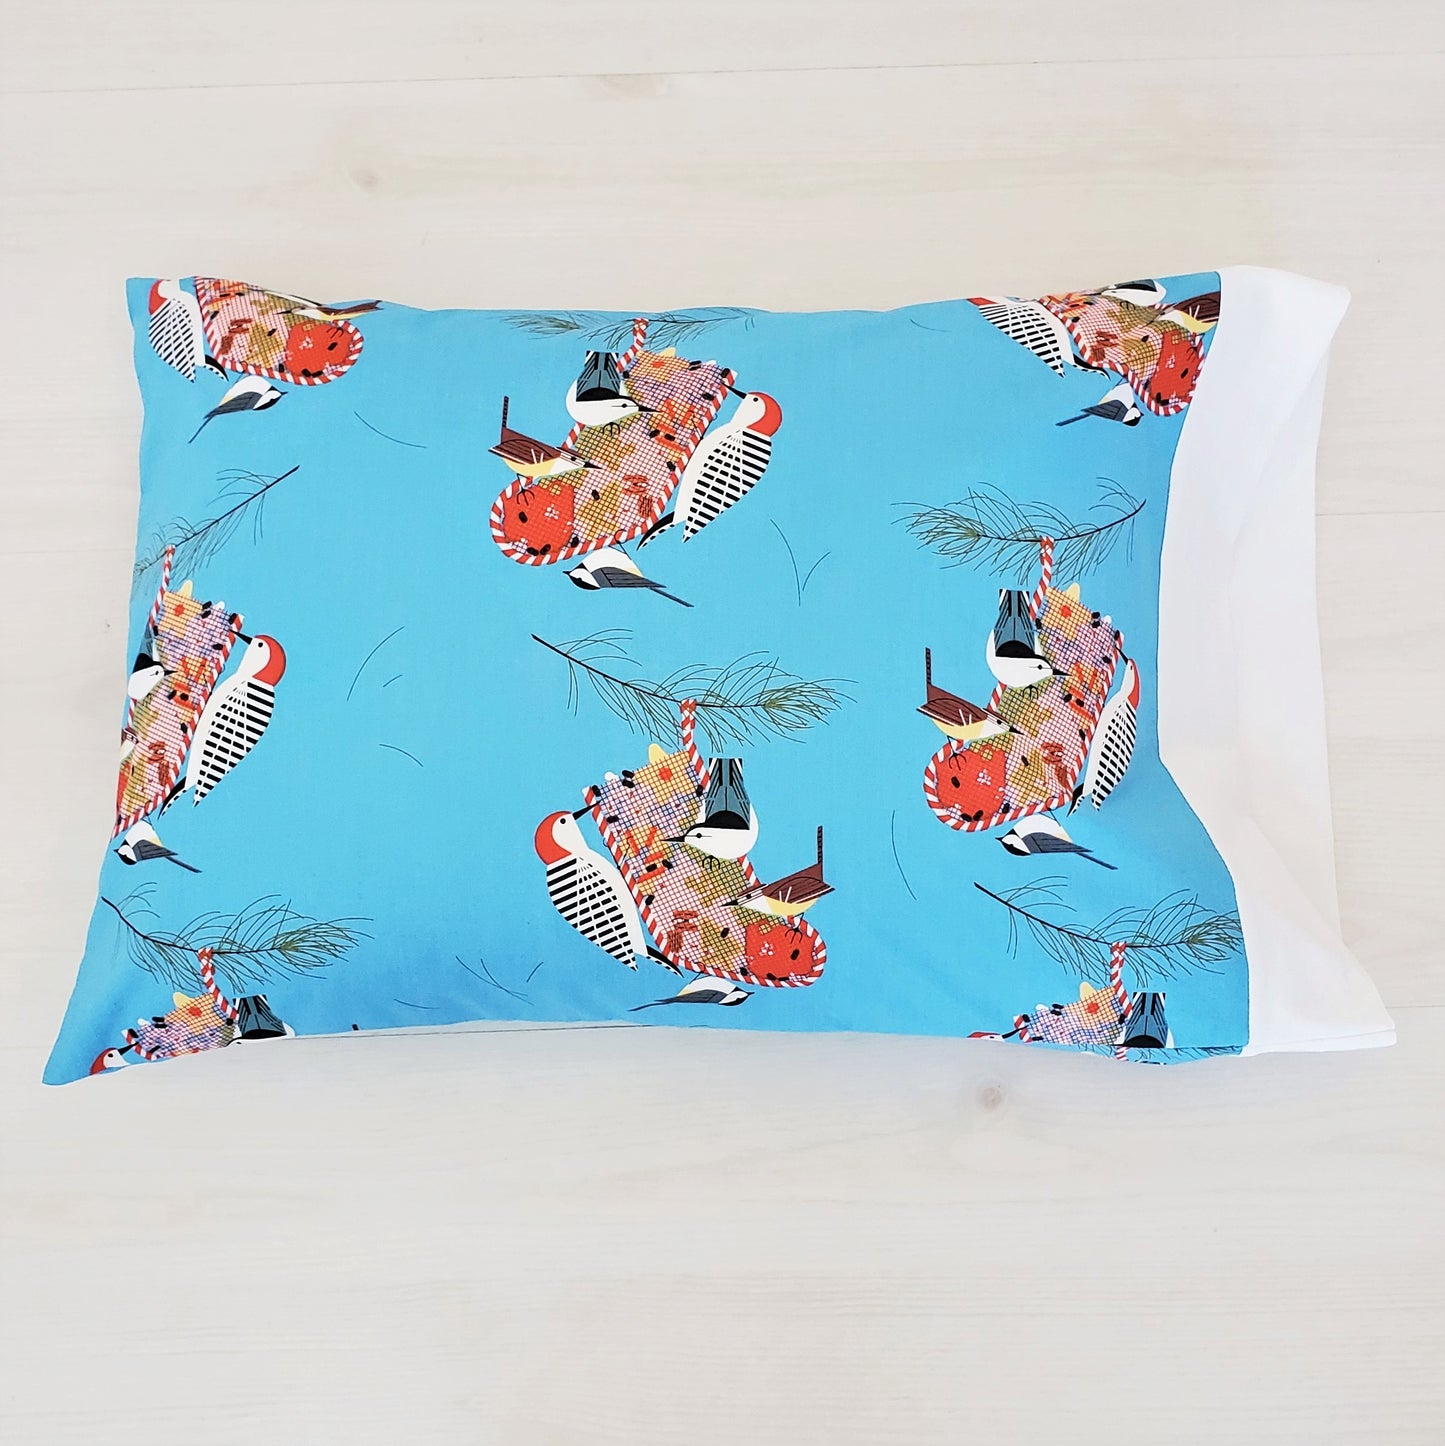 Organic Cotton Toddler Pillowcase in Charley Harper Holiday Prints